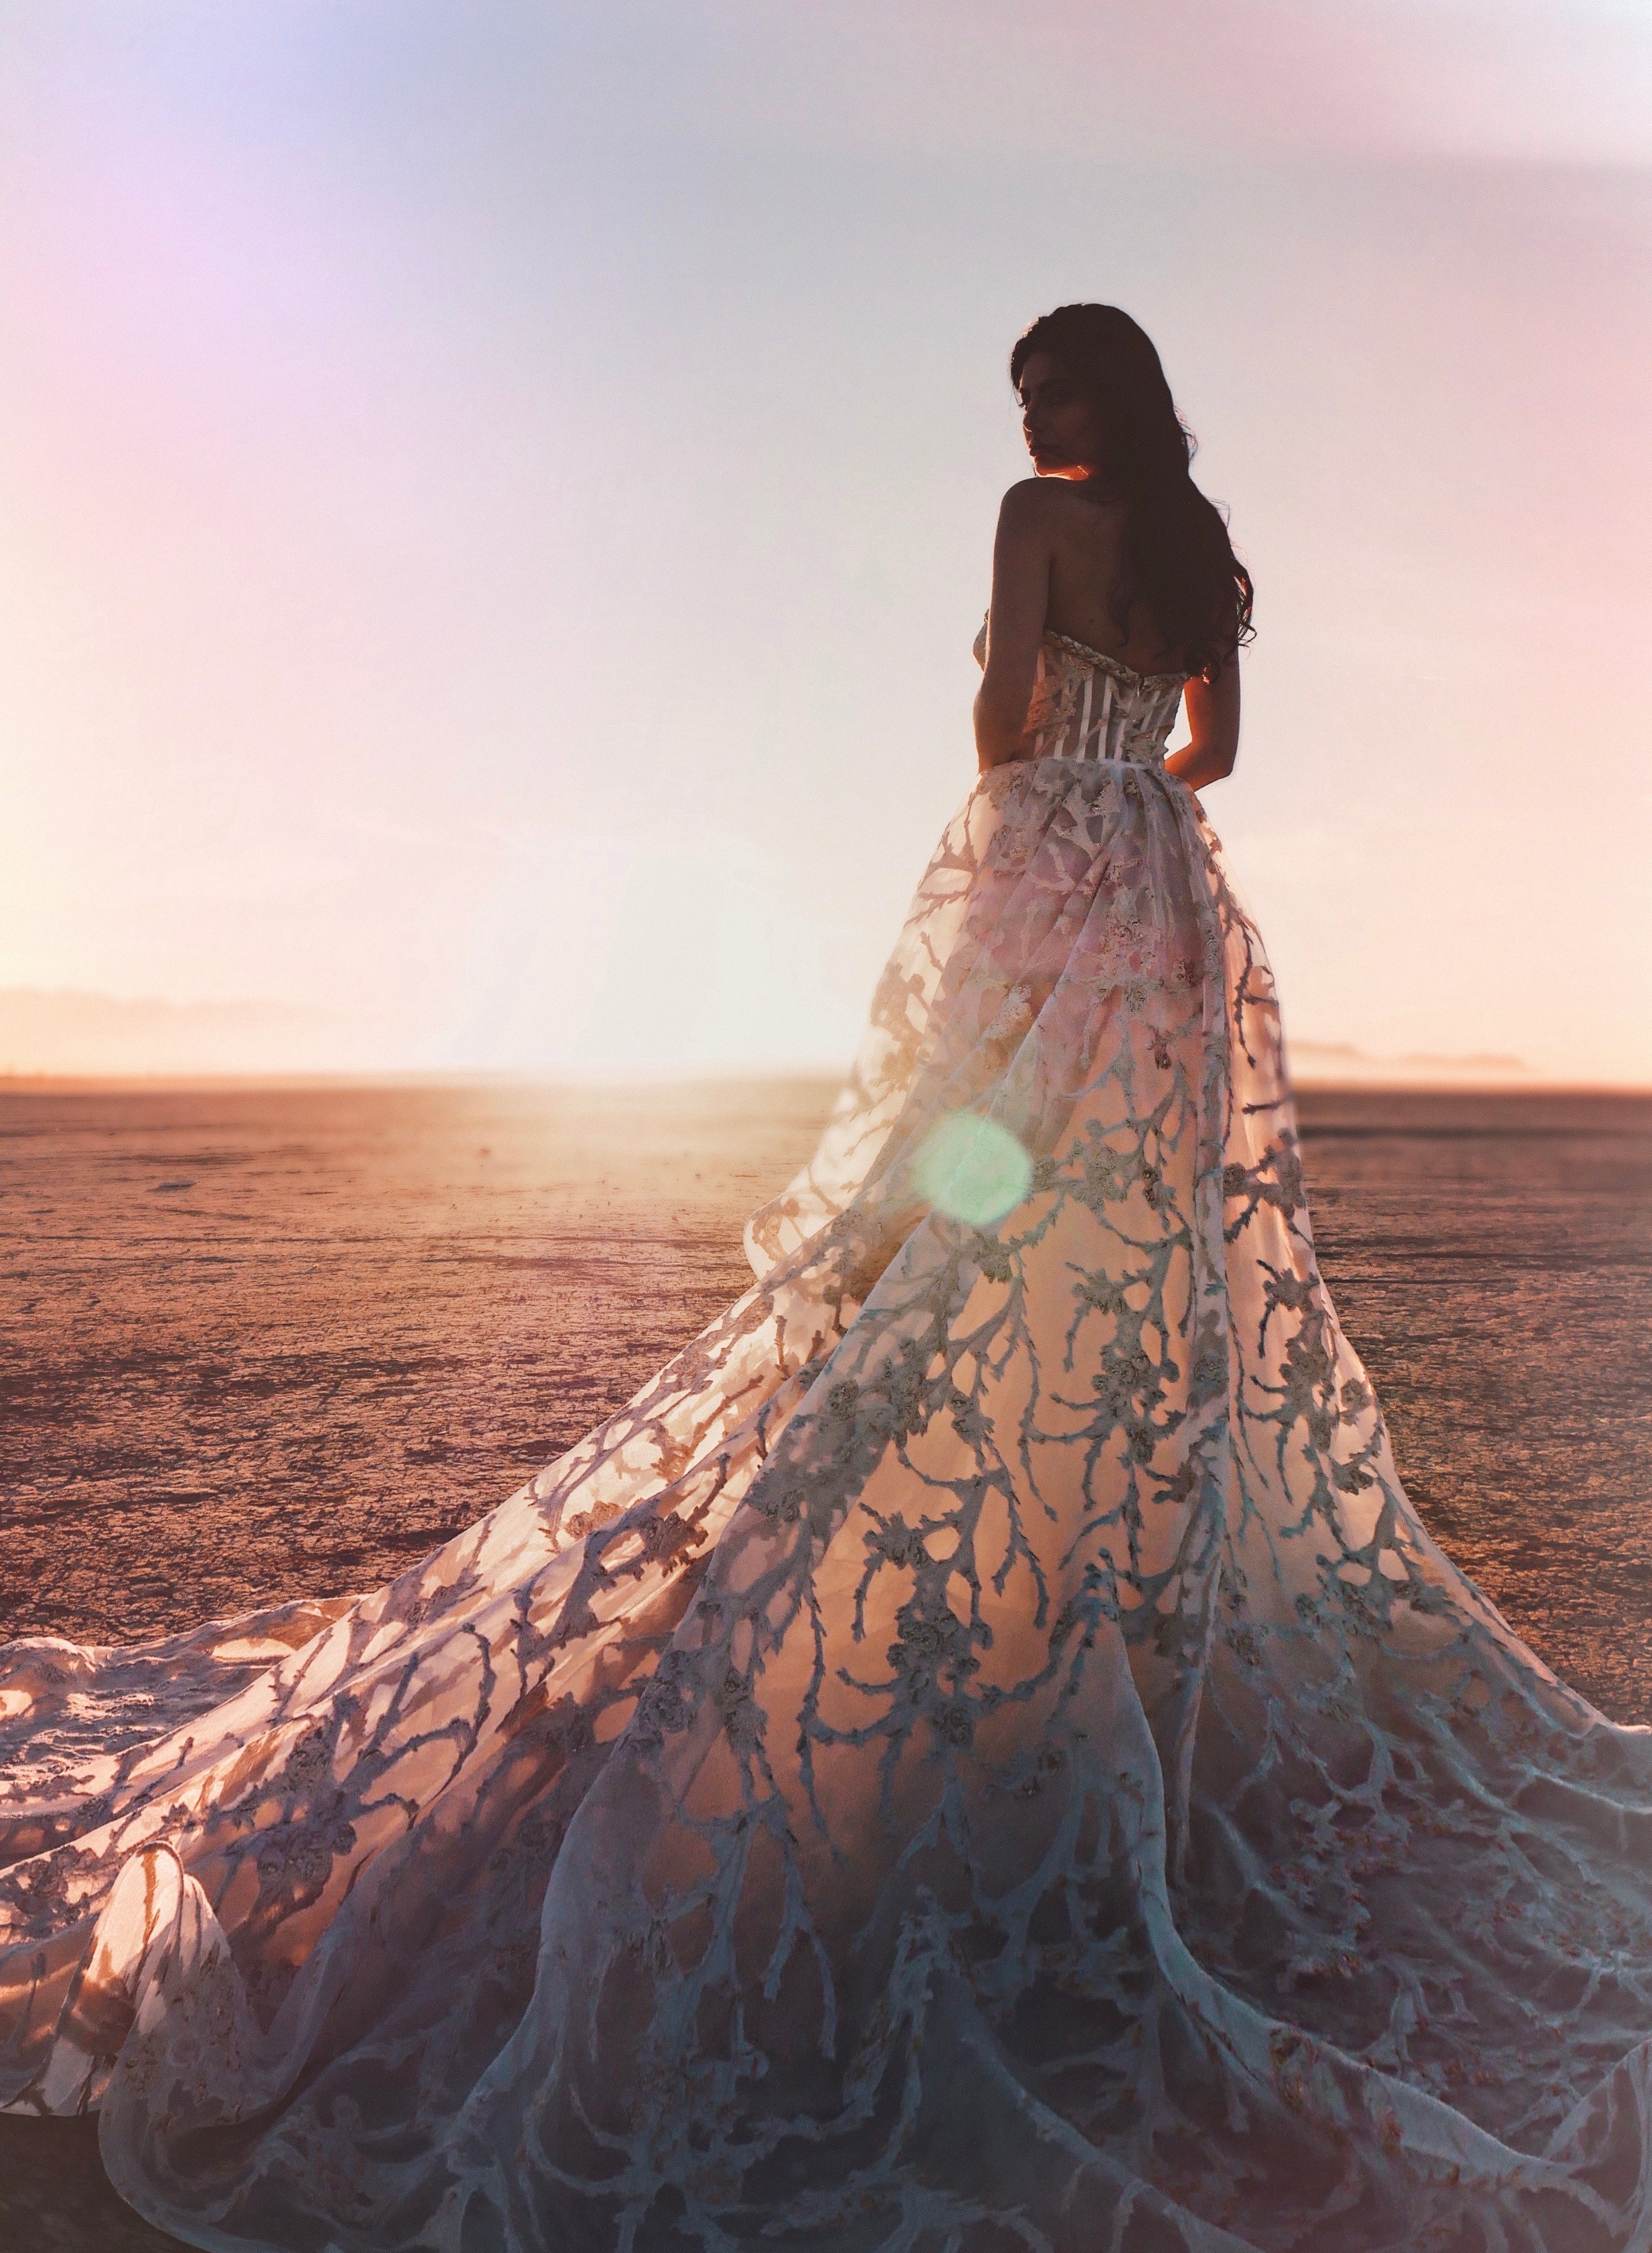 Gold bustier dress with long train at sunset